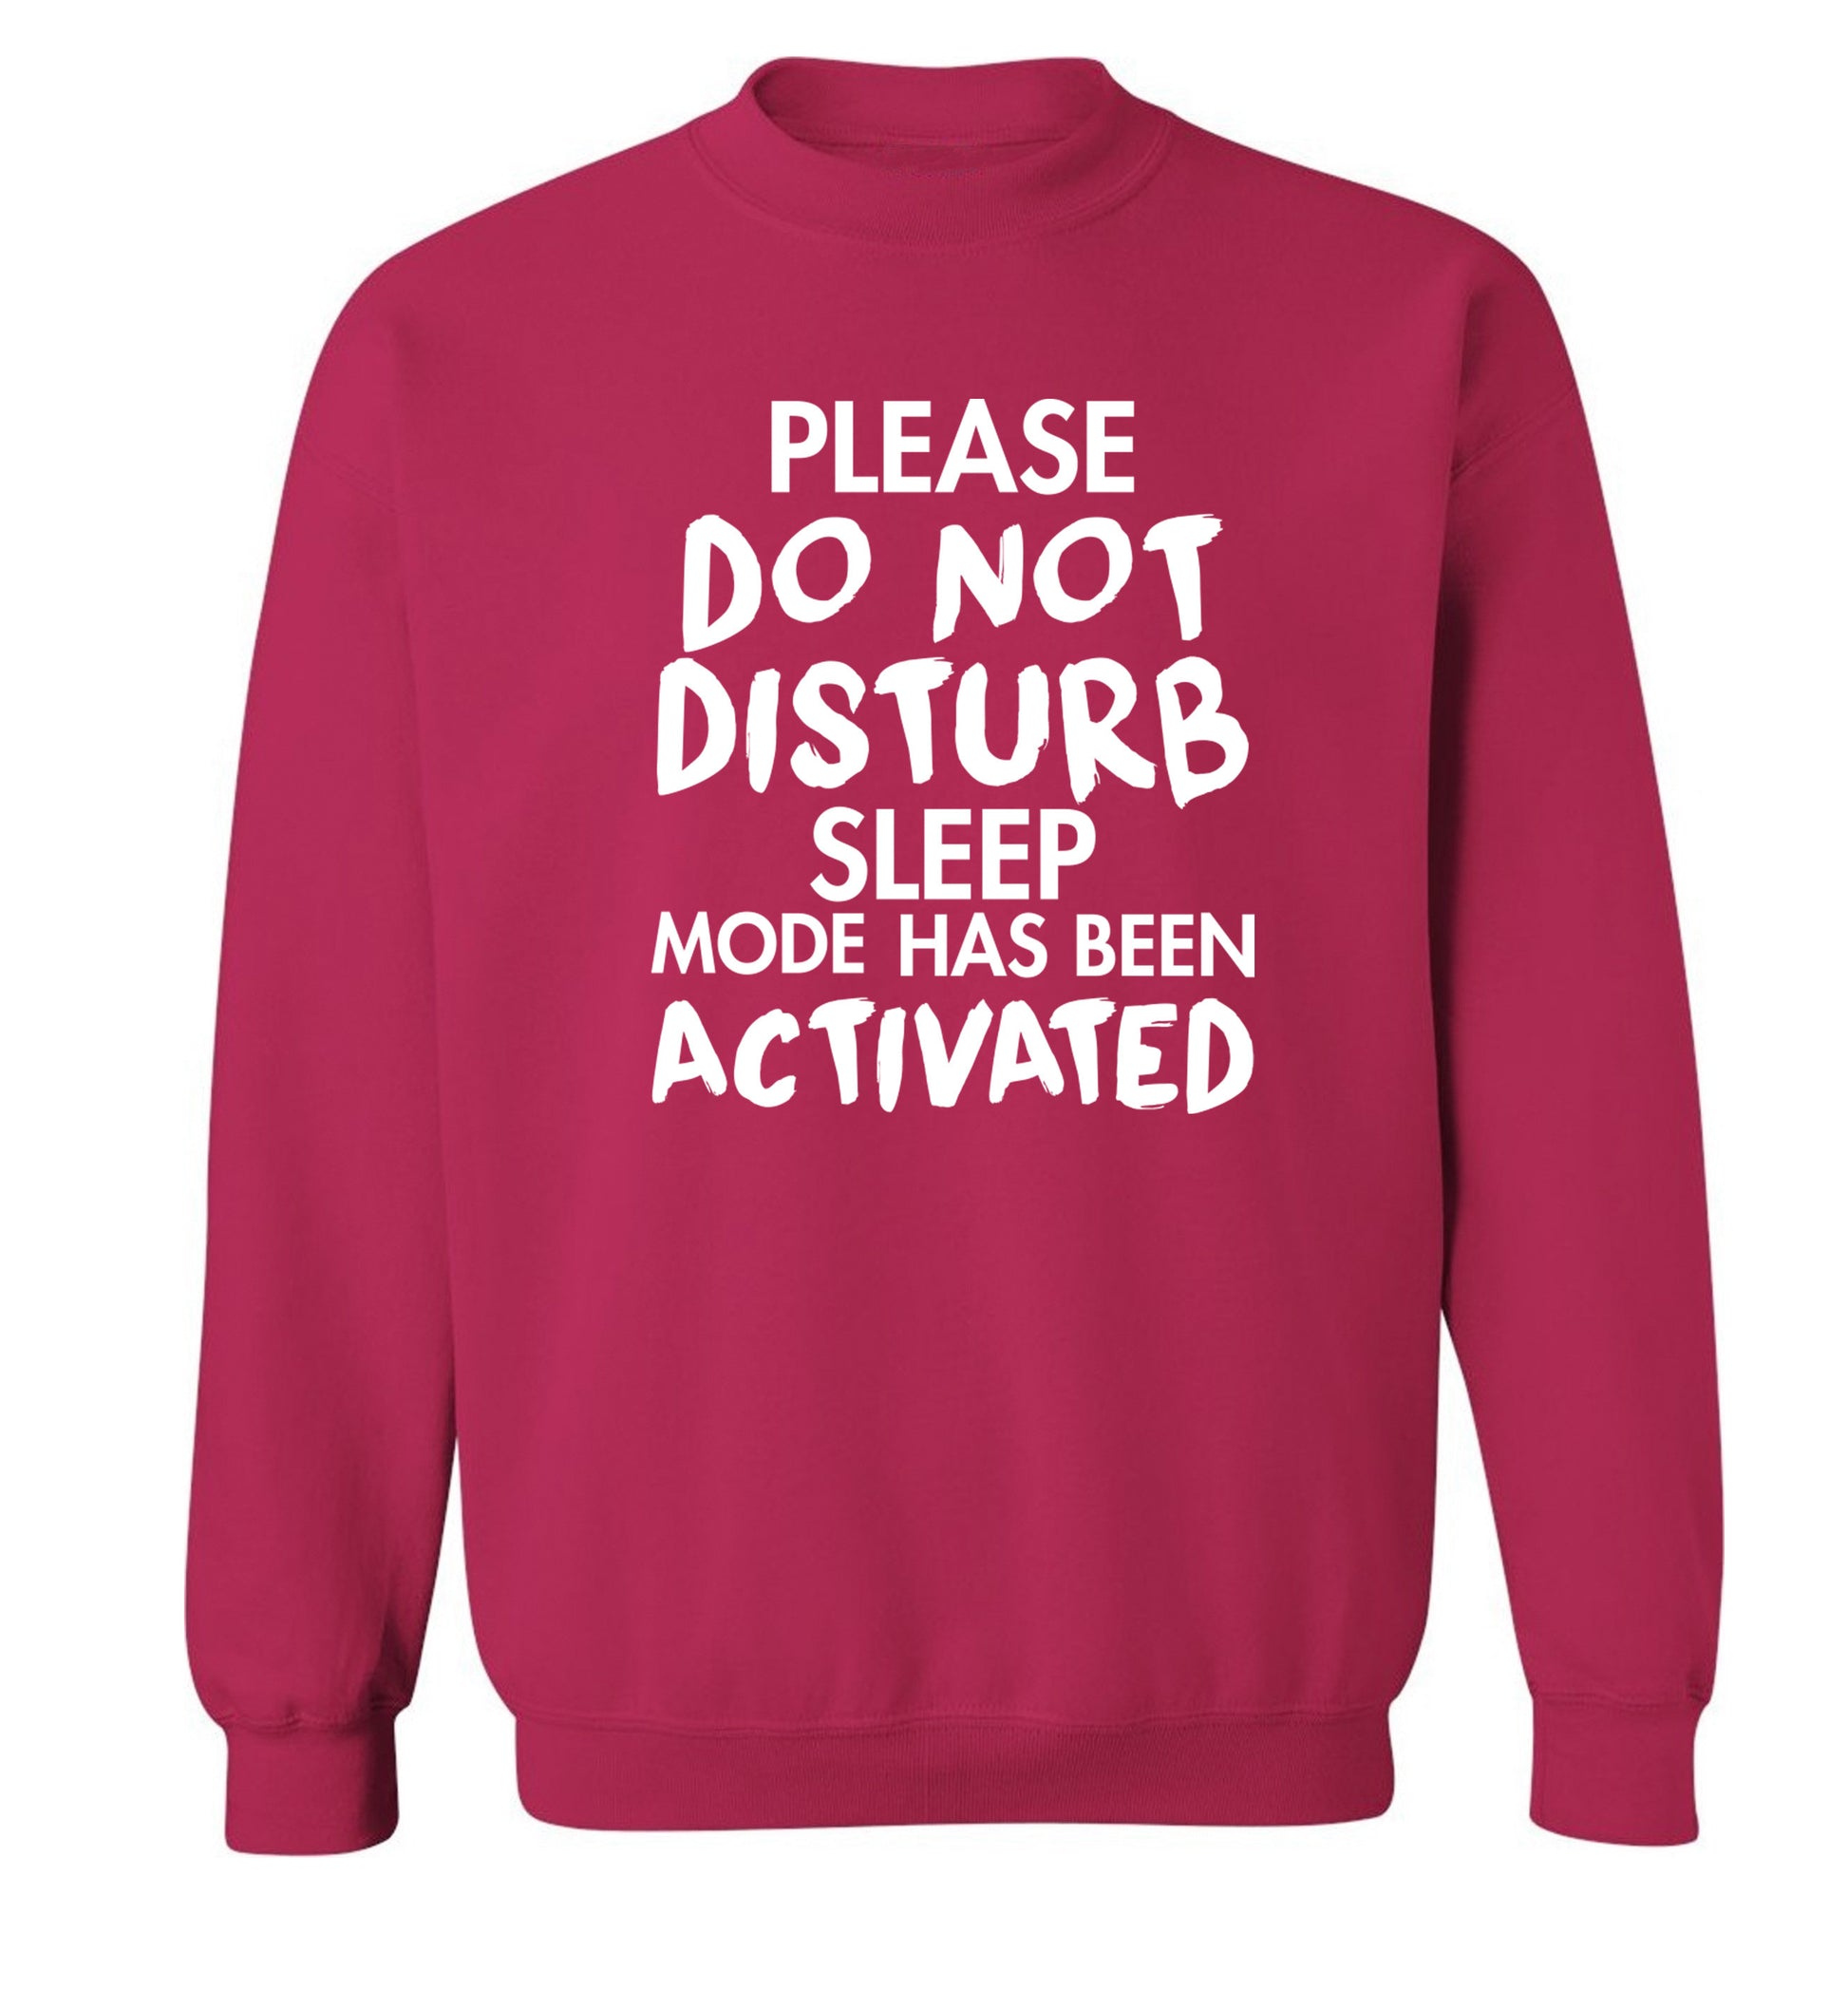 Please do not disturb sleeping mode has been activated Adult's unisex pink Sweater 2XL